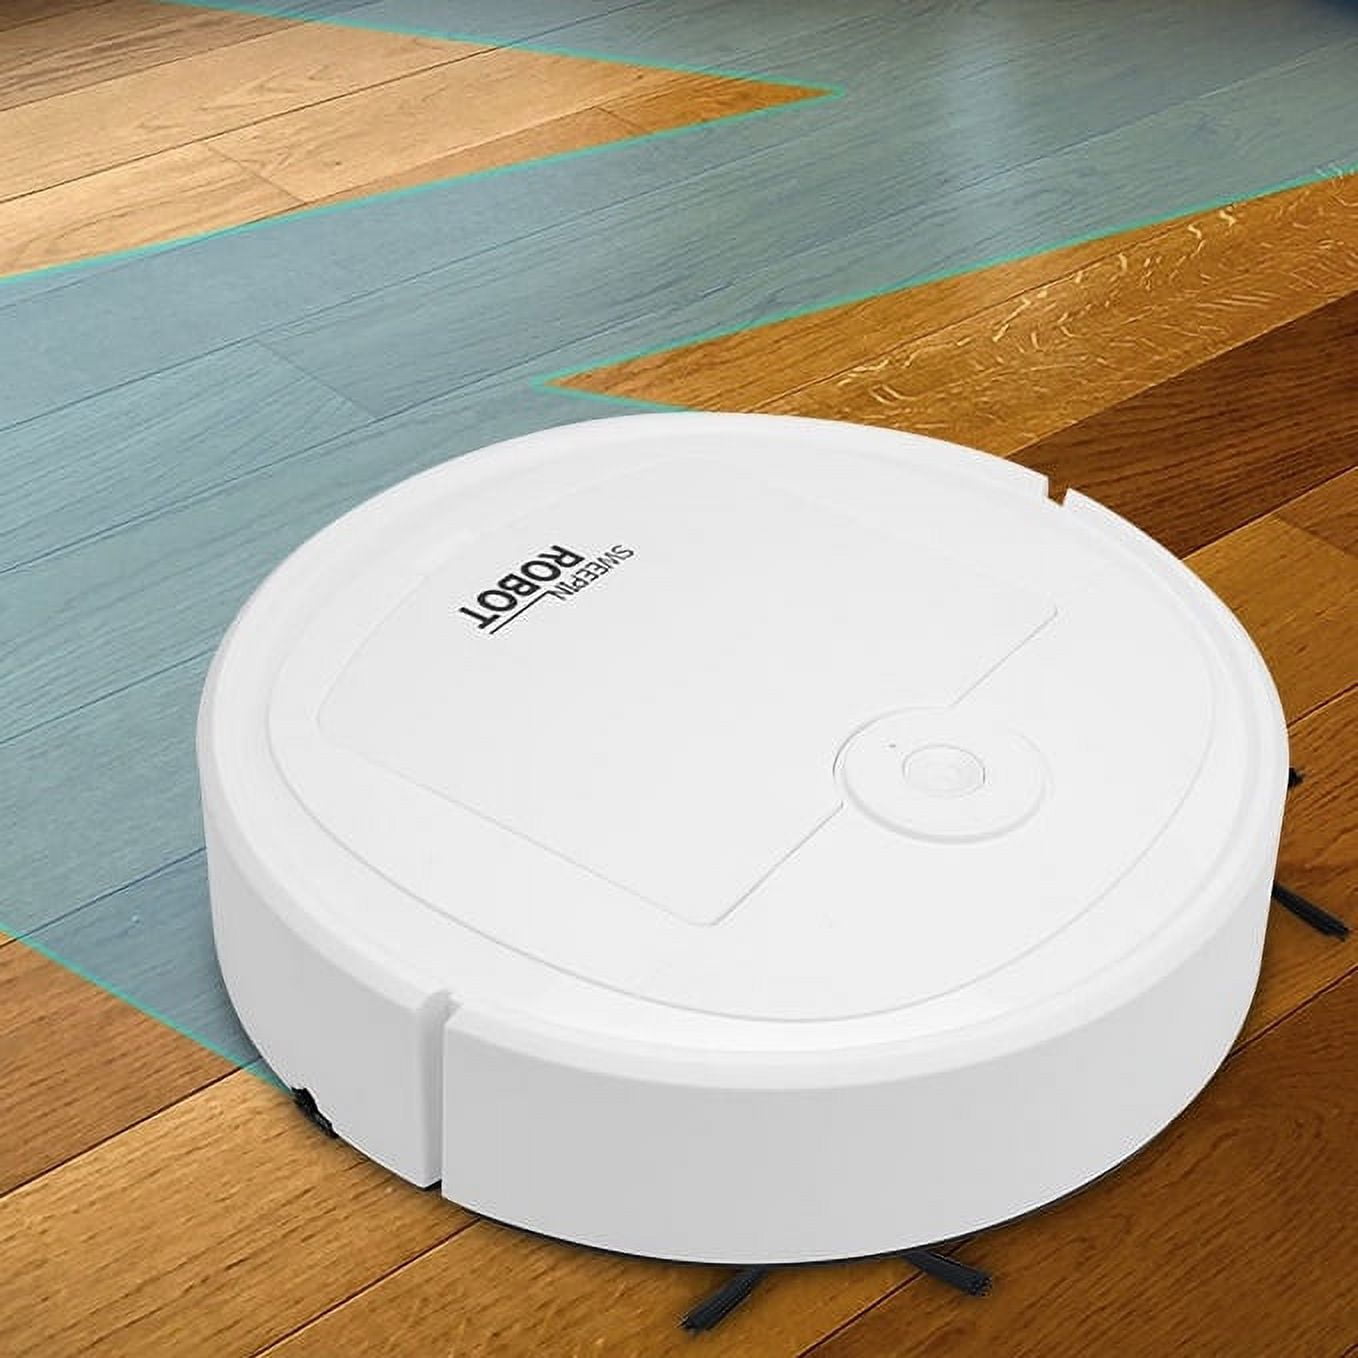  Birsppy Soule Robot Vacuum and Mop, Automatic Dirt